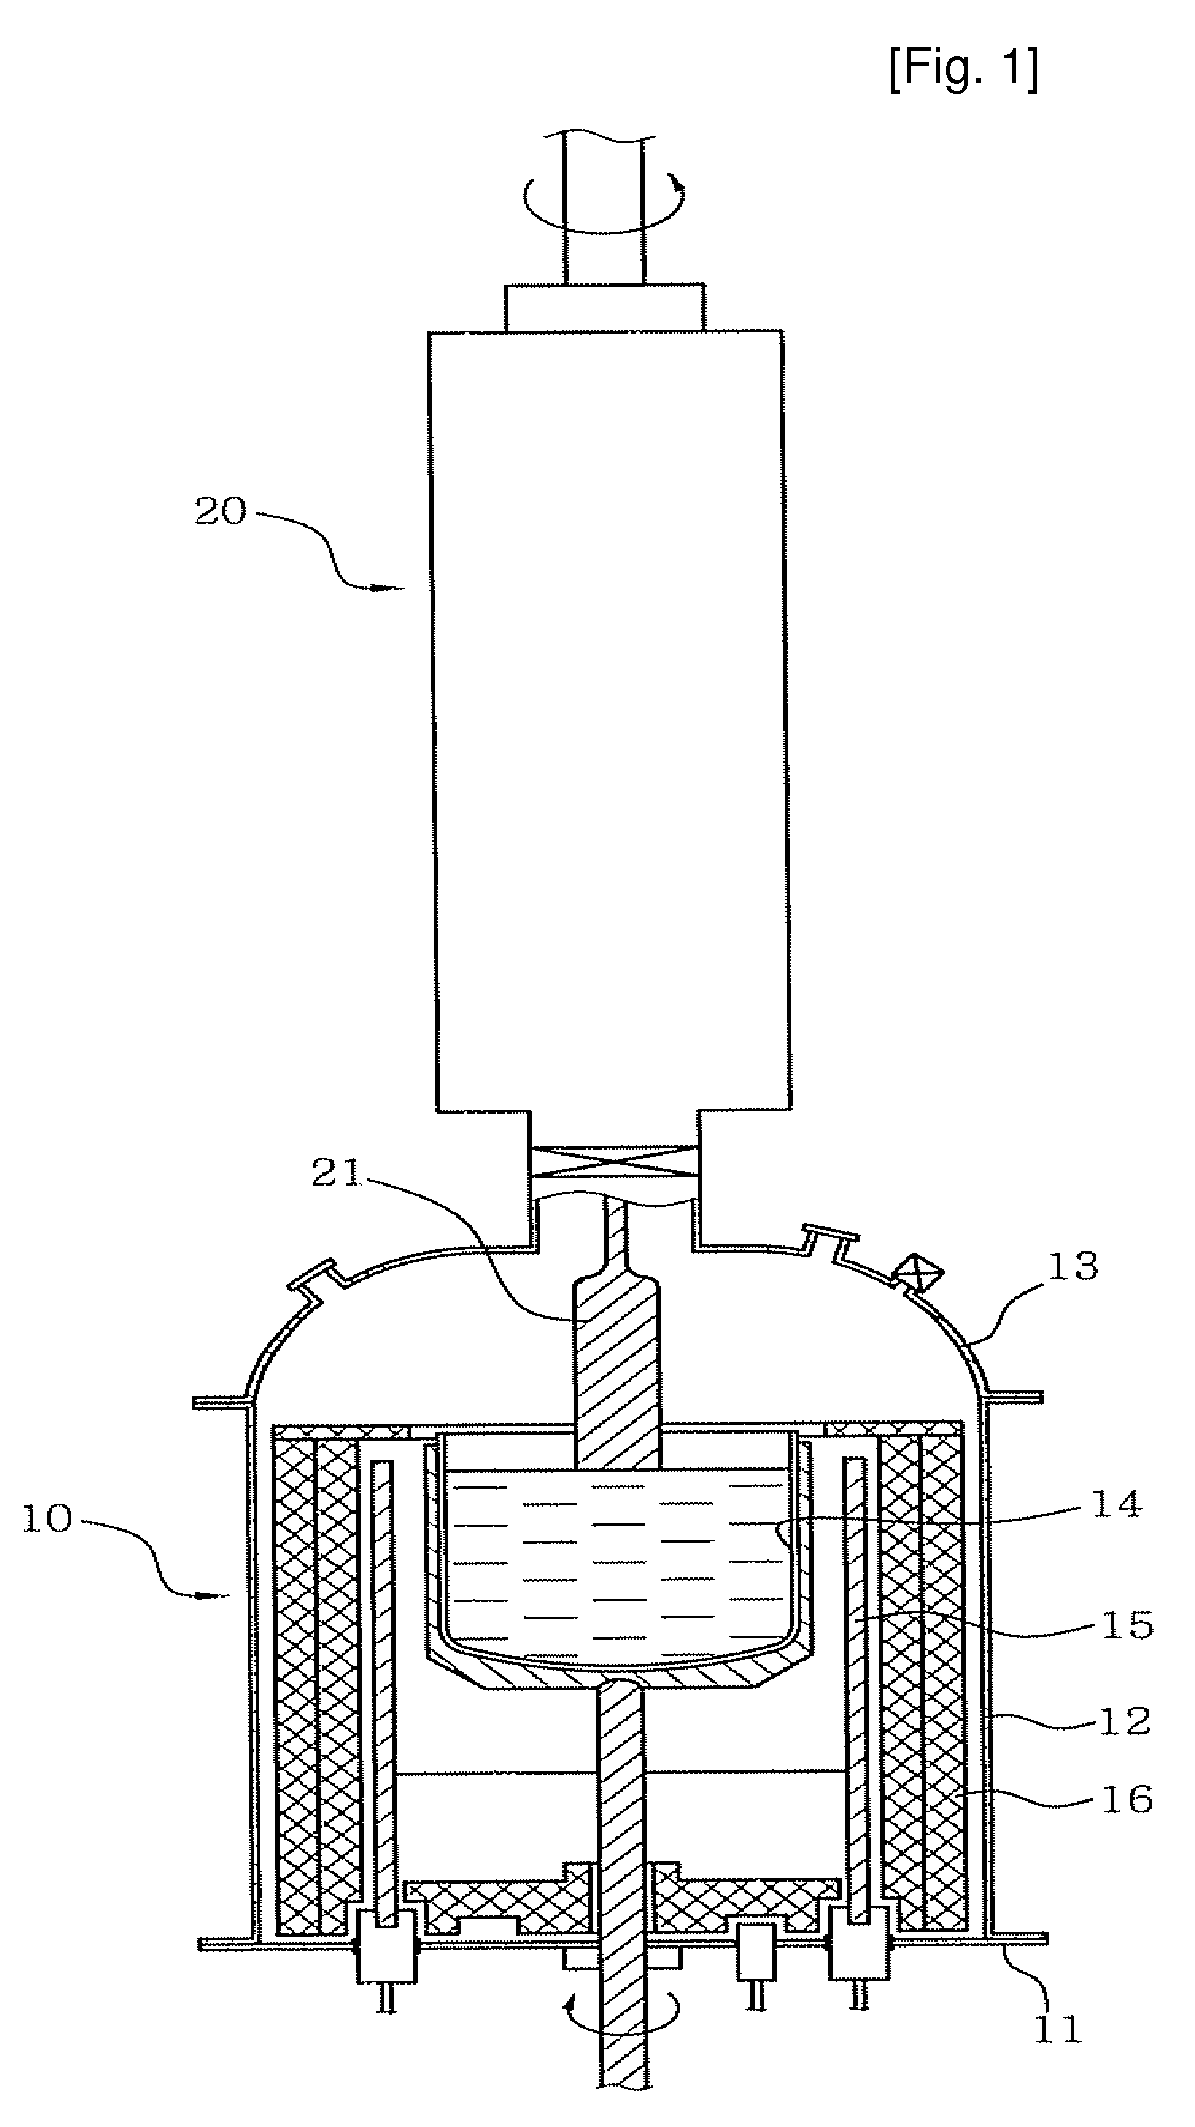 Cooling System for Chamber of Ingot Growth Arrangement